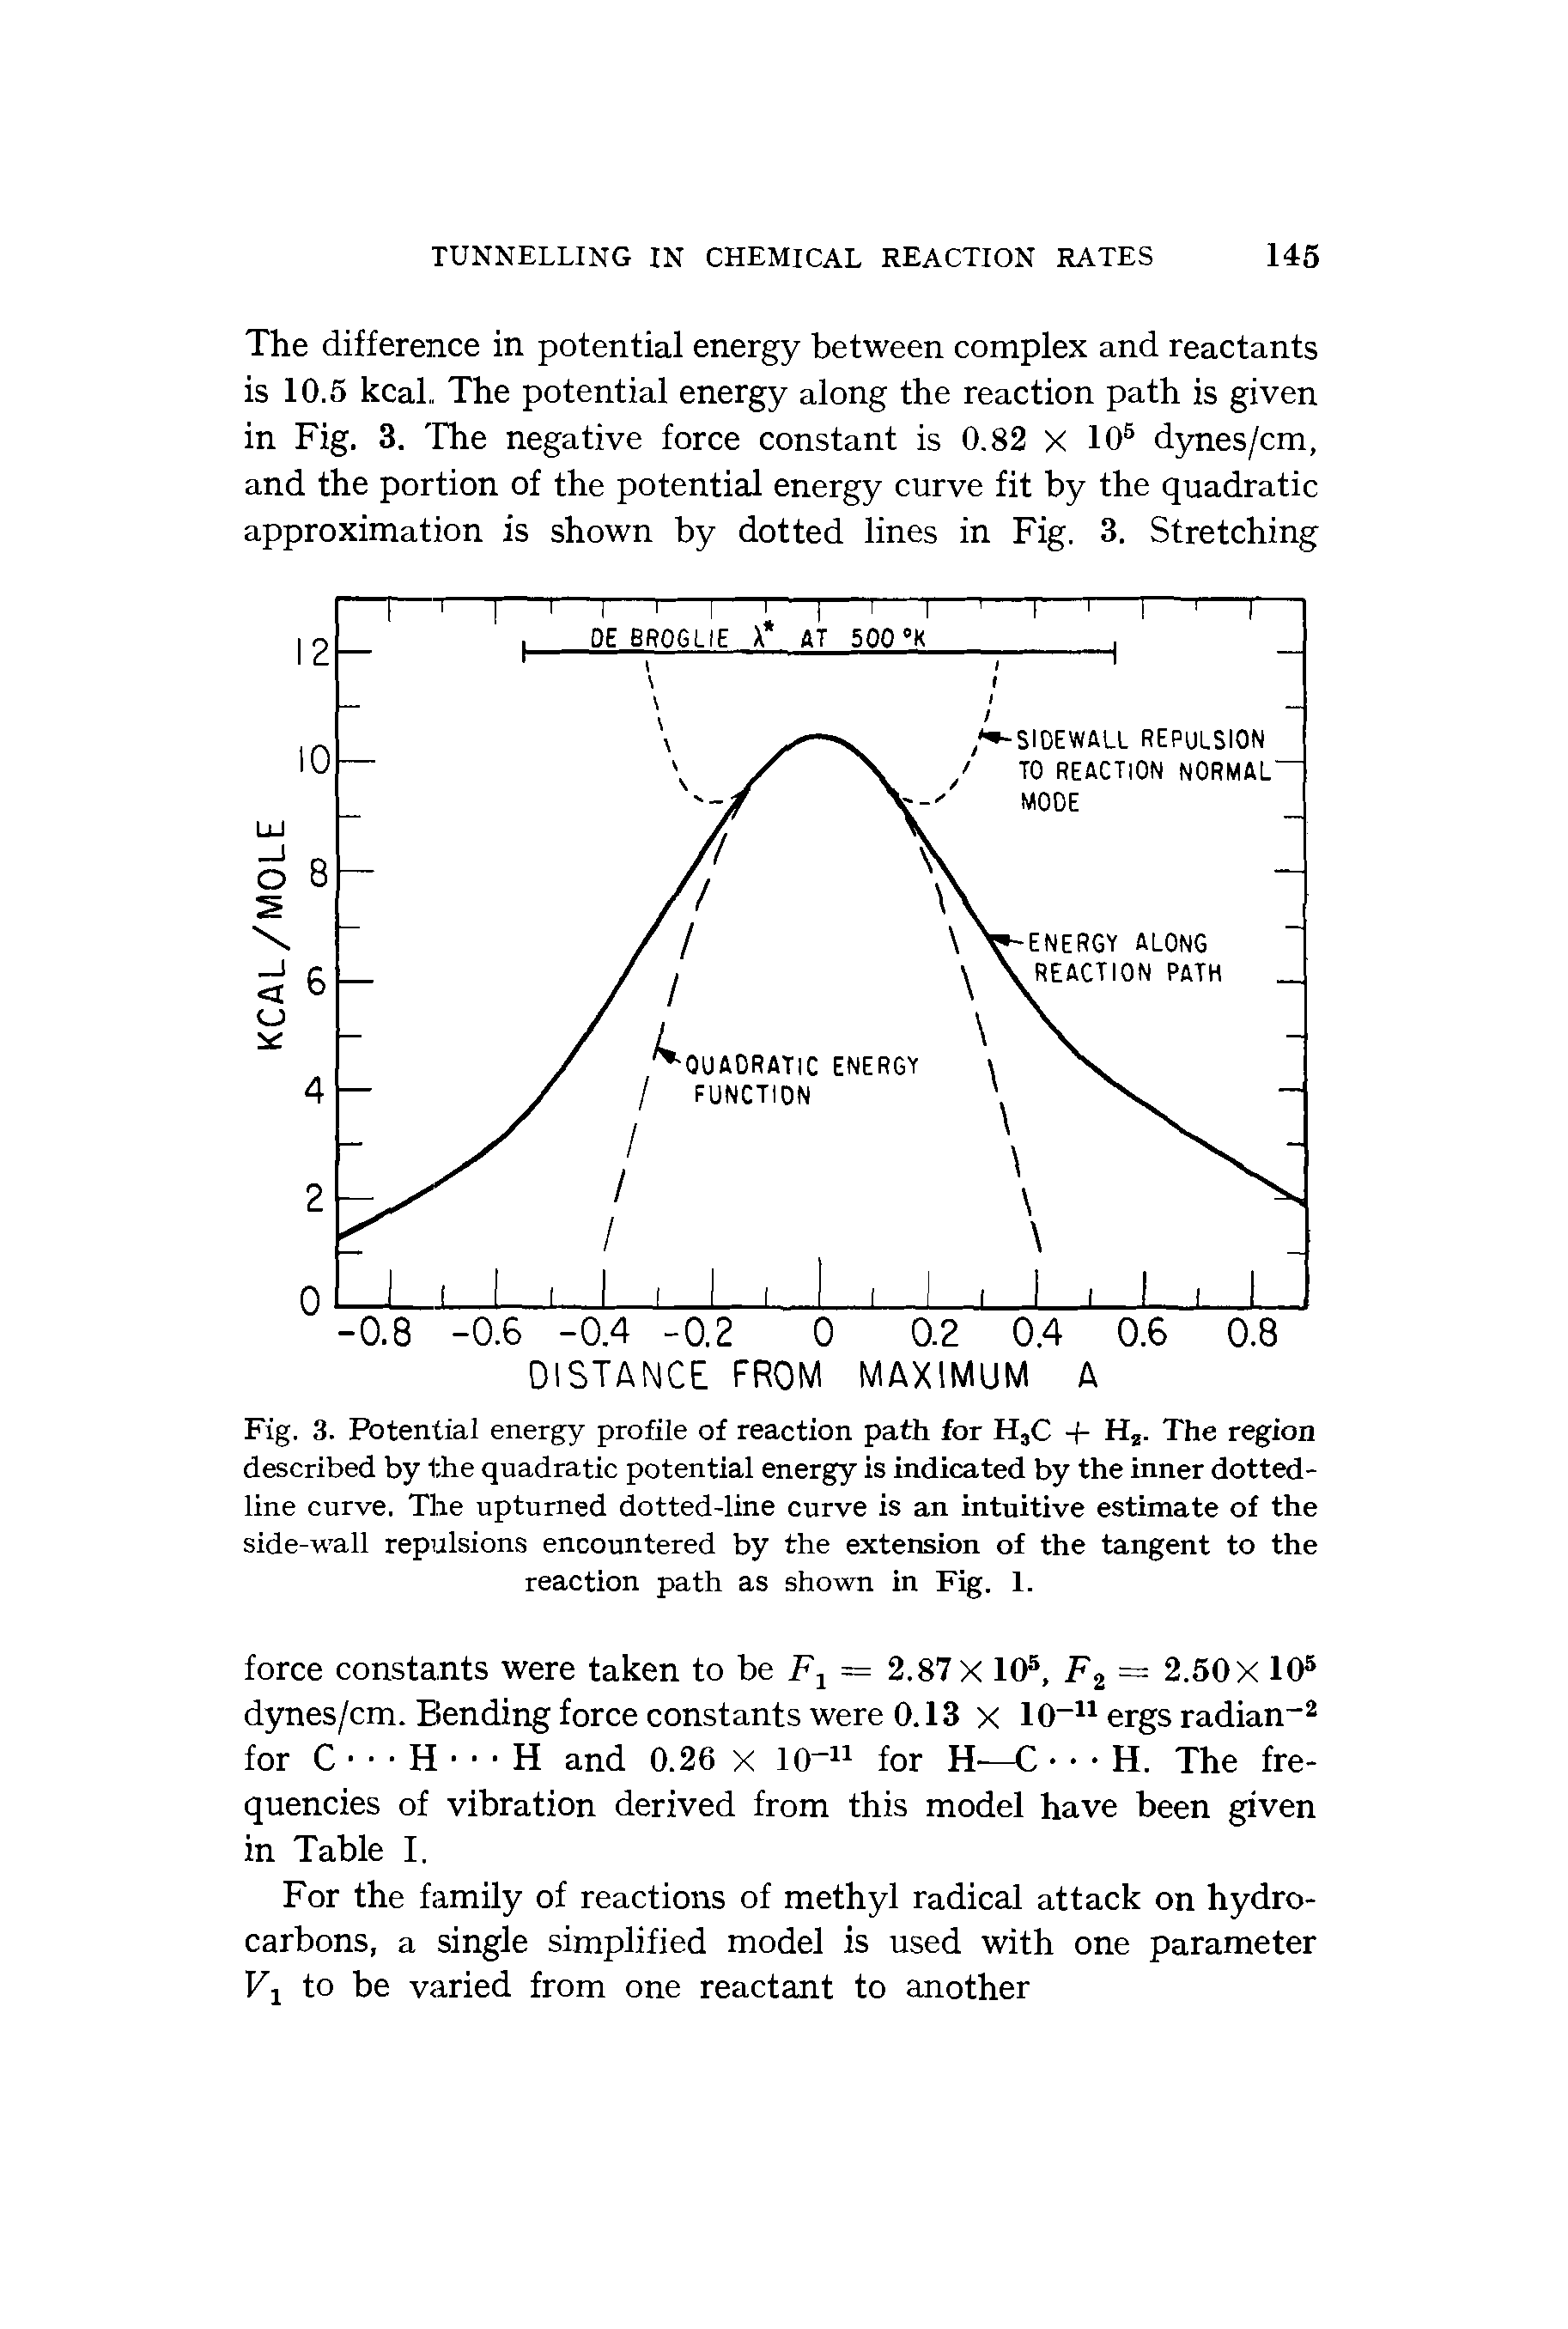 Fig. 3. Potential energy profile of reaction path for H,C + Hj. The region described by the quadratic potential energy is indicated by the inner dotted-line curve. The upturned dotted-line curve is an intuitive estimate of the side-wall repulsions encountered by the extension of the tangent to the reaction path as shown in Fig. 1.